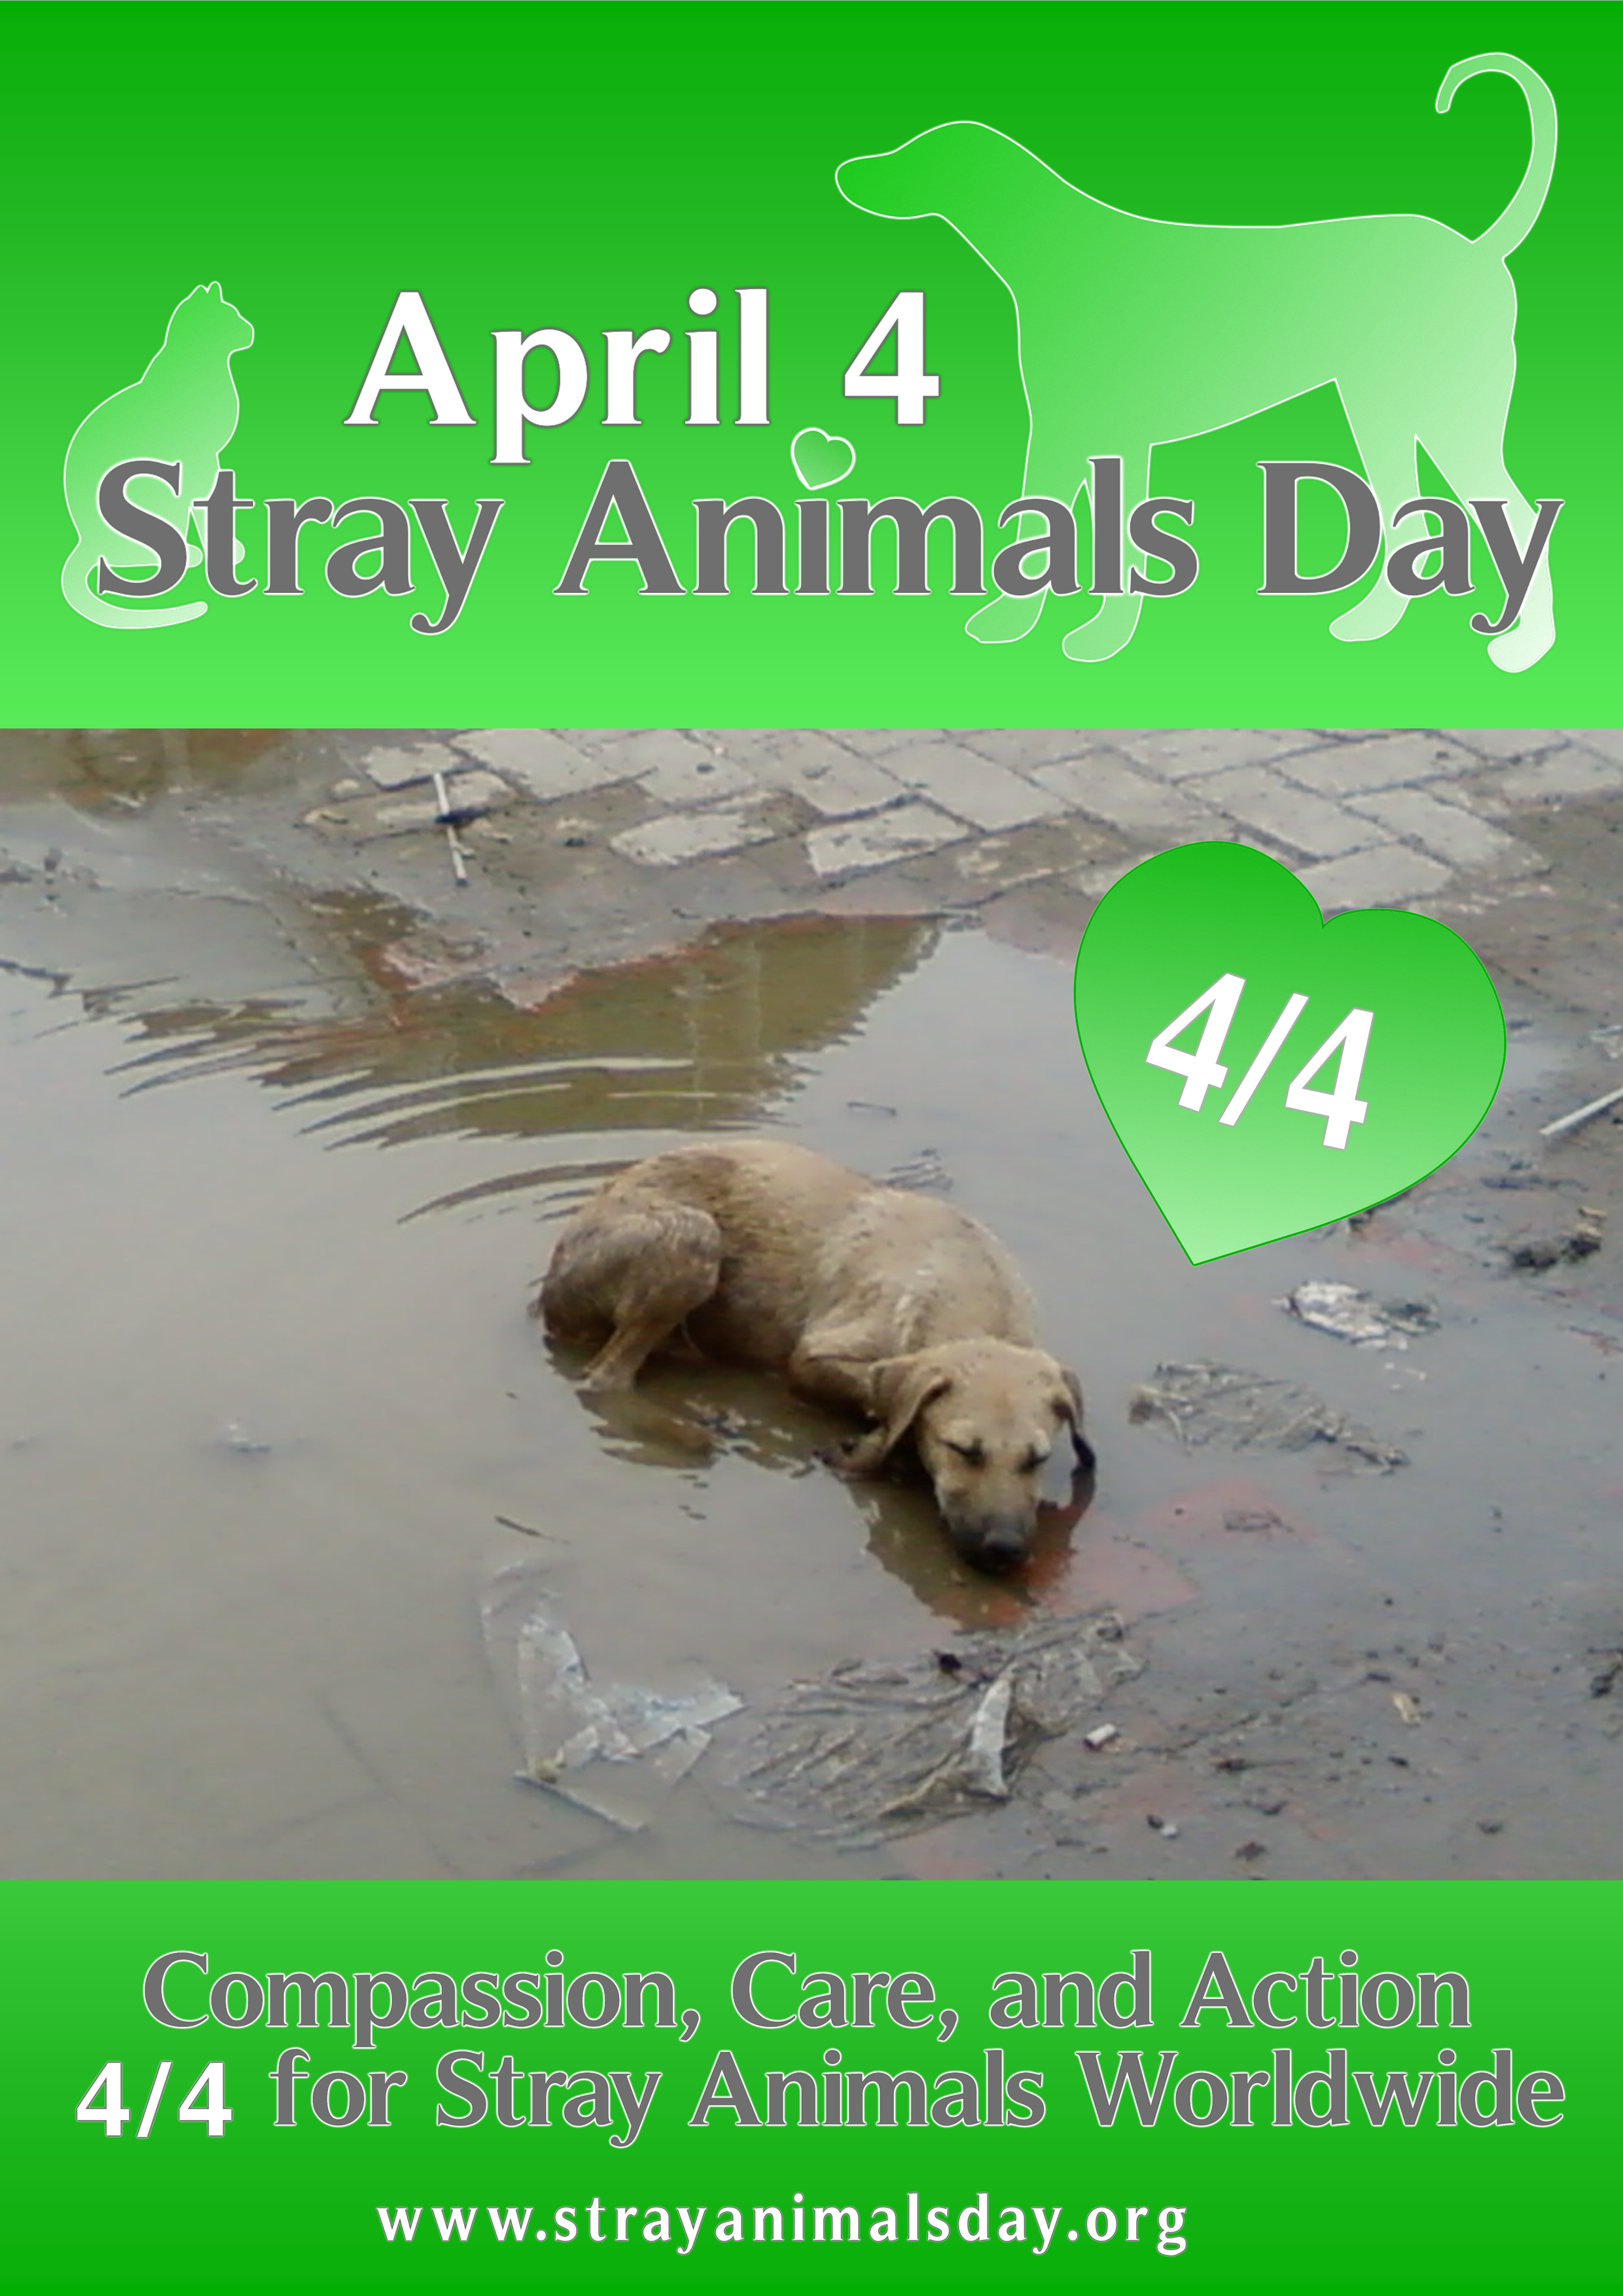 Download Poster Page - April 4 Stray Animals Day sharing page